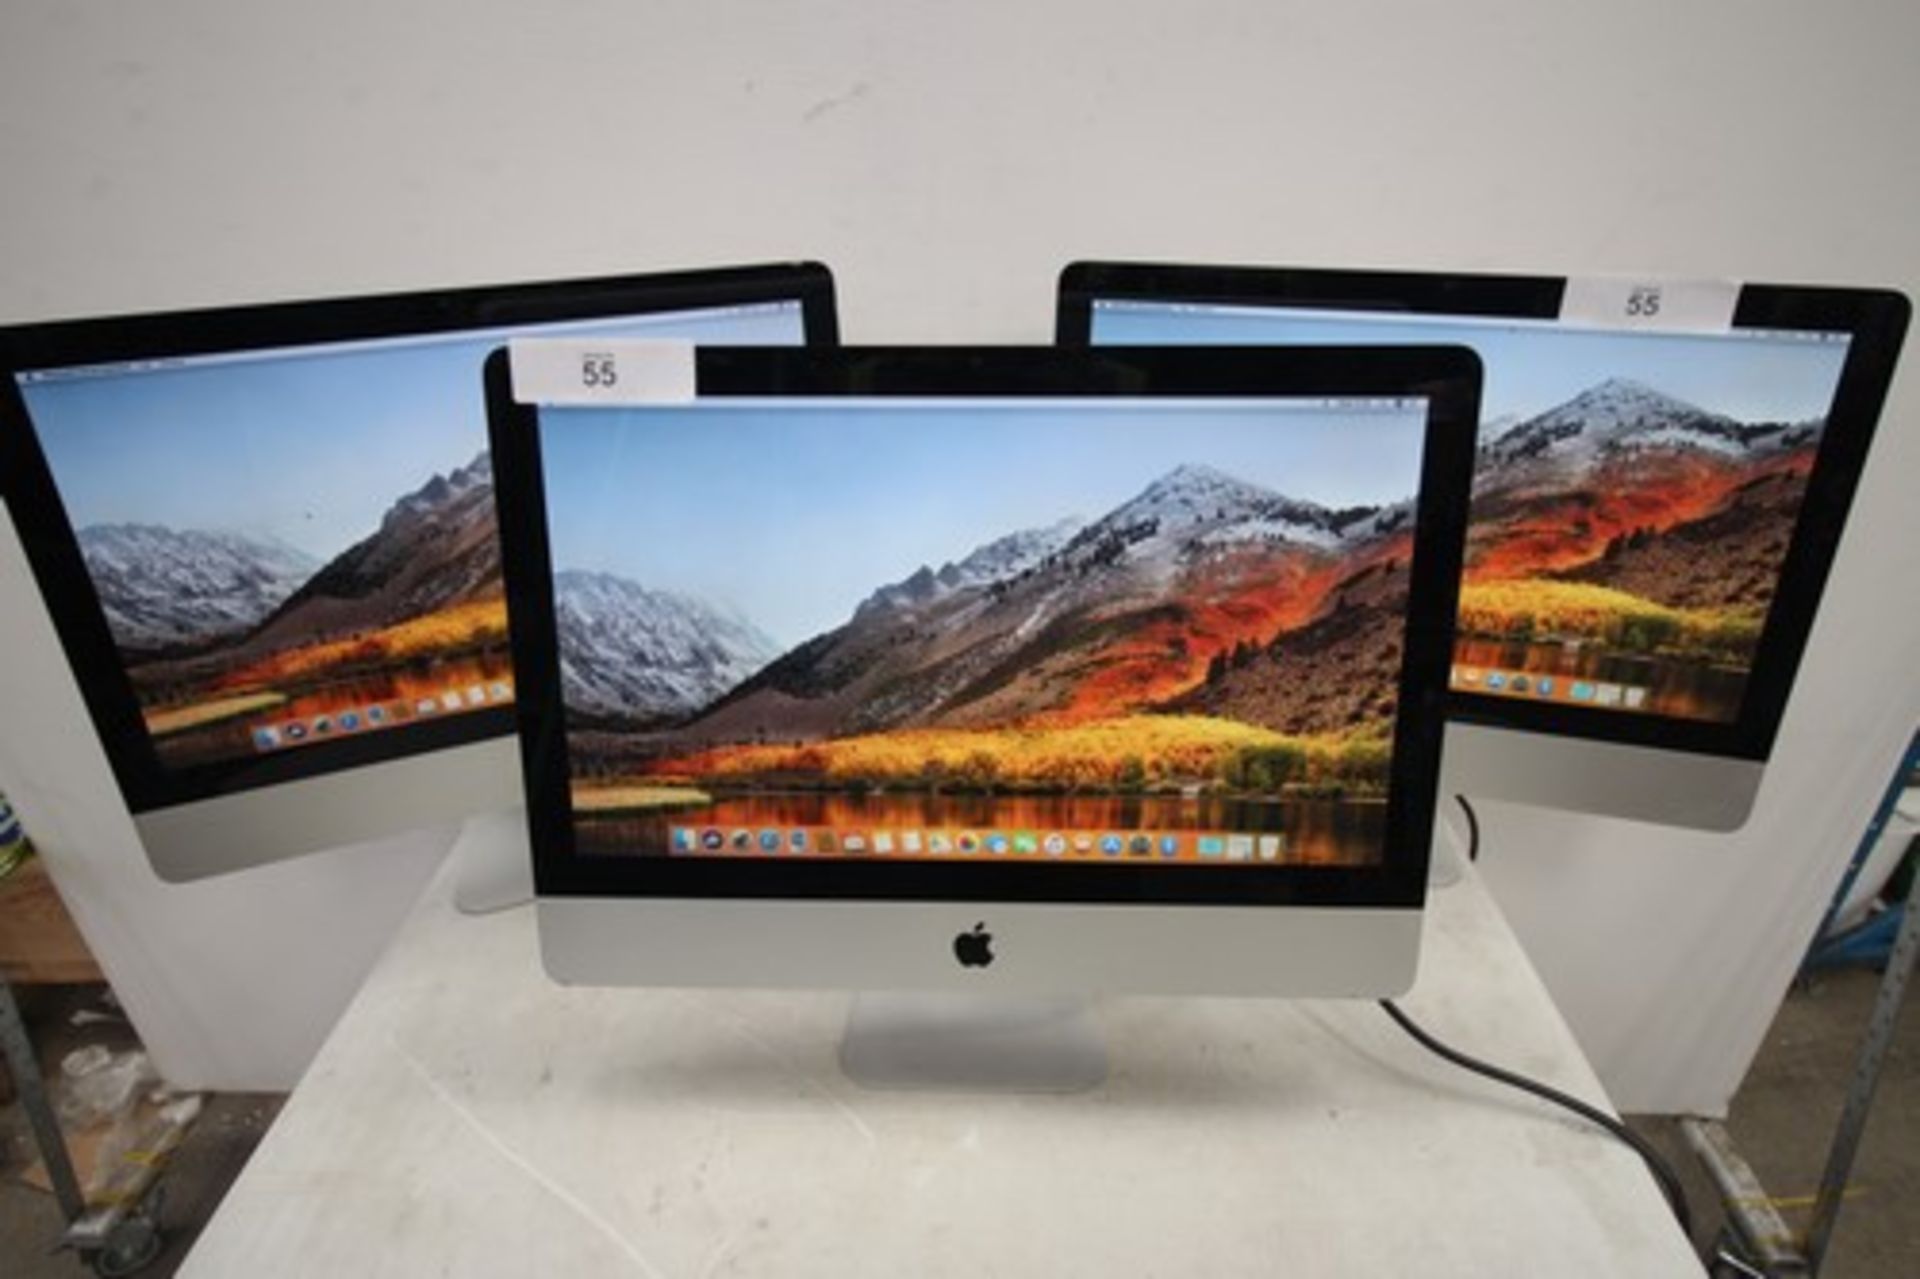 3 x Apple iMac 21.5" desktop computers, model No: A1311, powers on ok, not tested - second-hand (